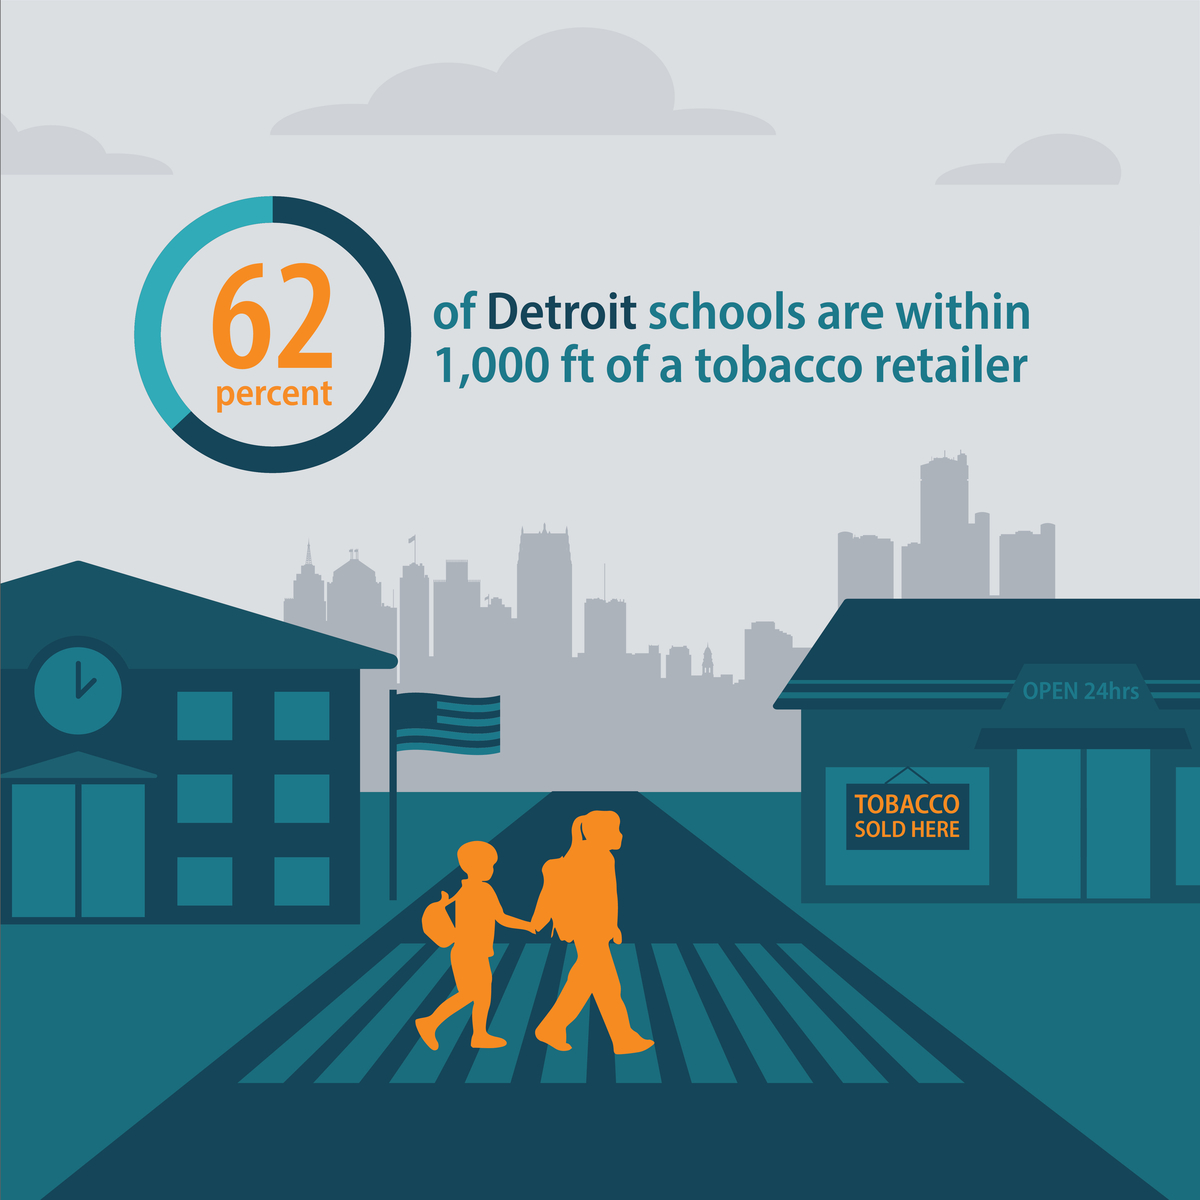 60 percent of Detroit schools are within 1,000 feet of a tobacco retailer